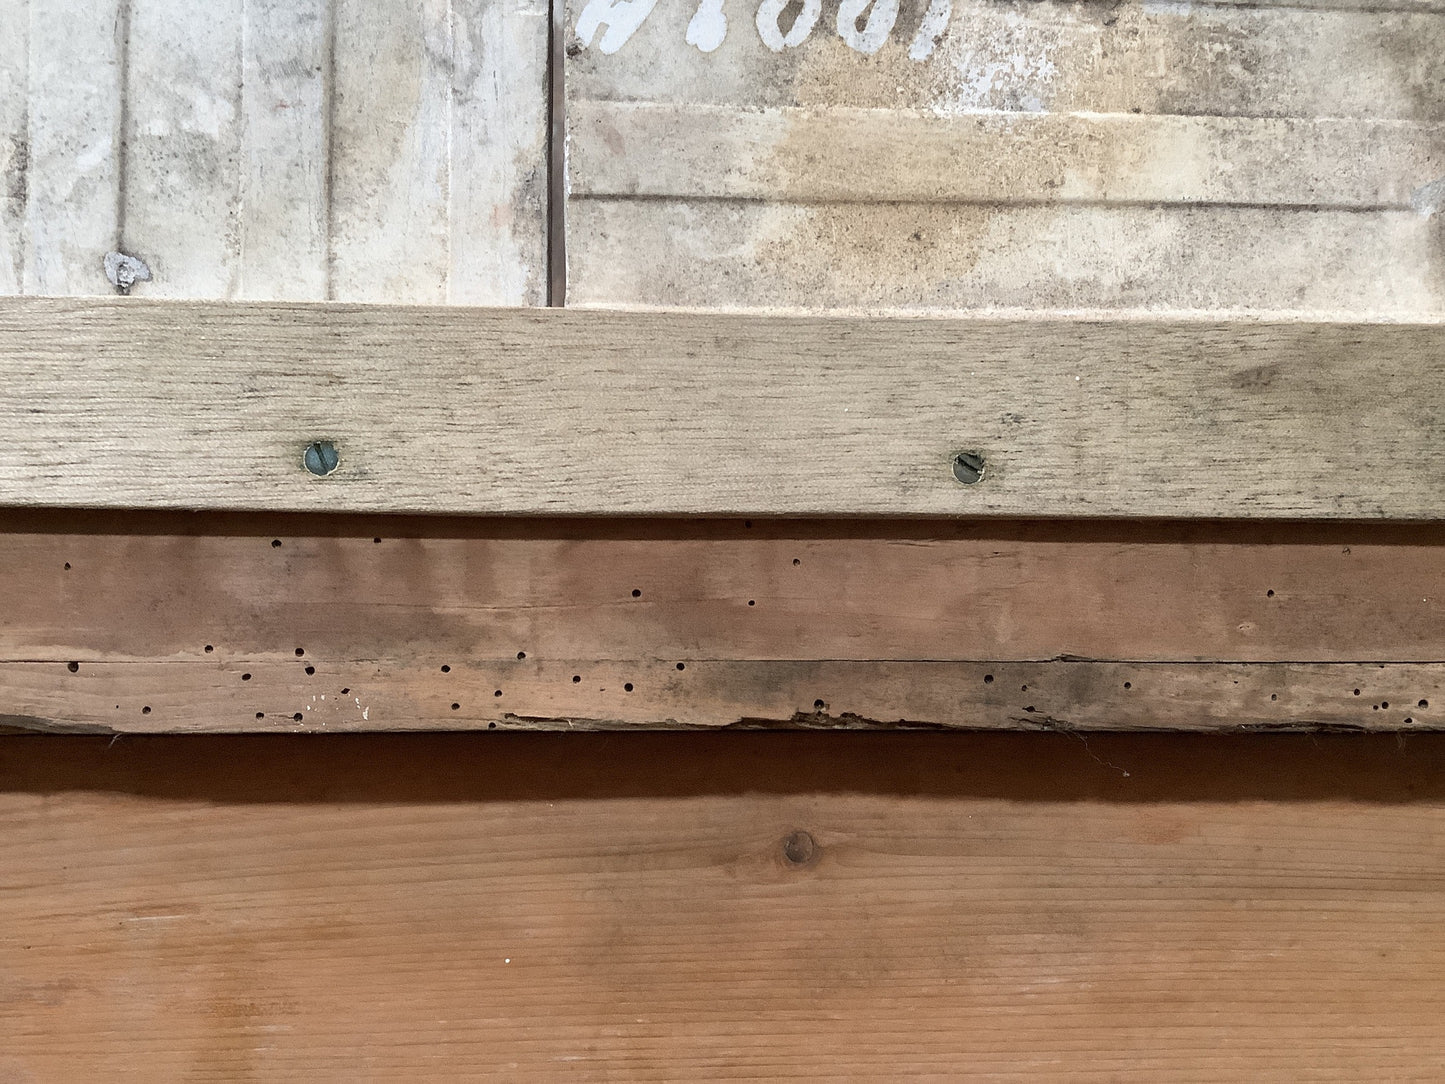 Old woodworm damage